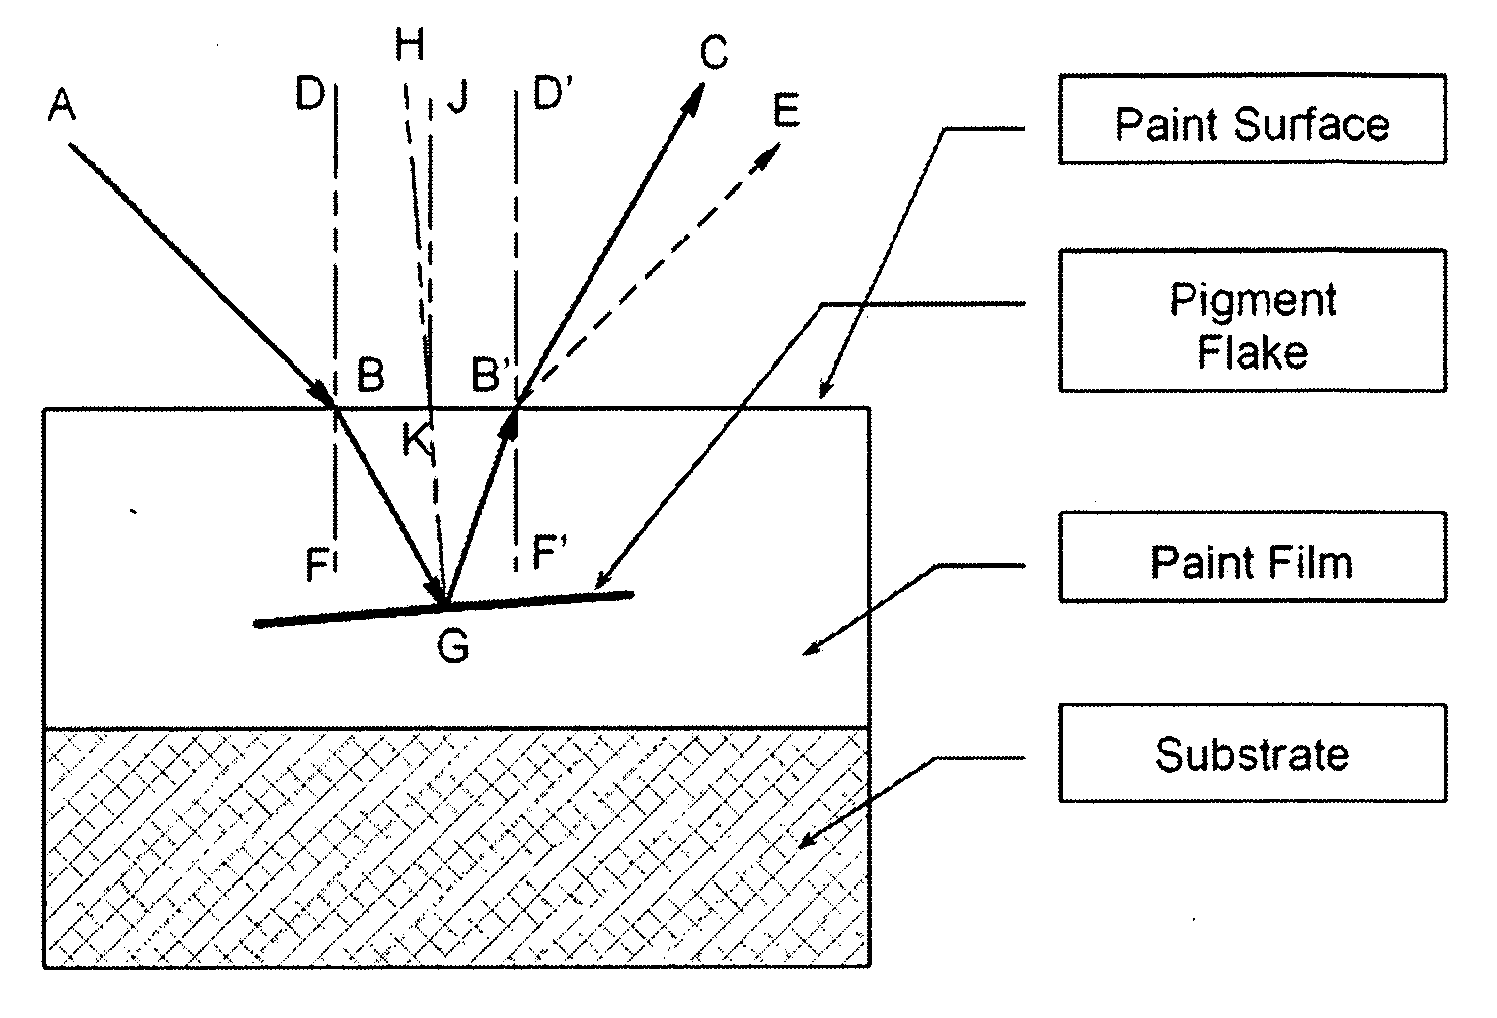 Process for generating bidirectional reflectance distribution functions of gonioapparent materials with limited measurement data